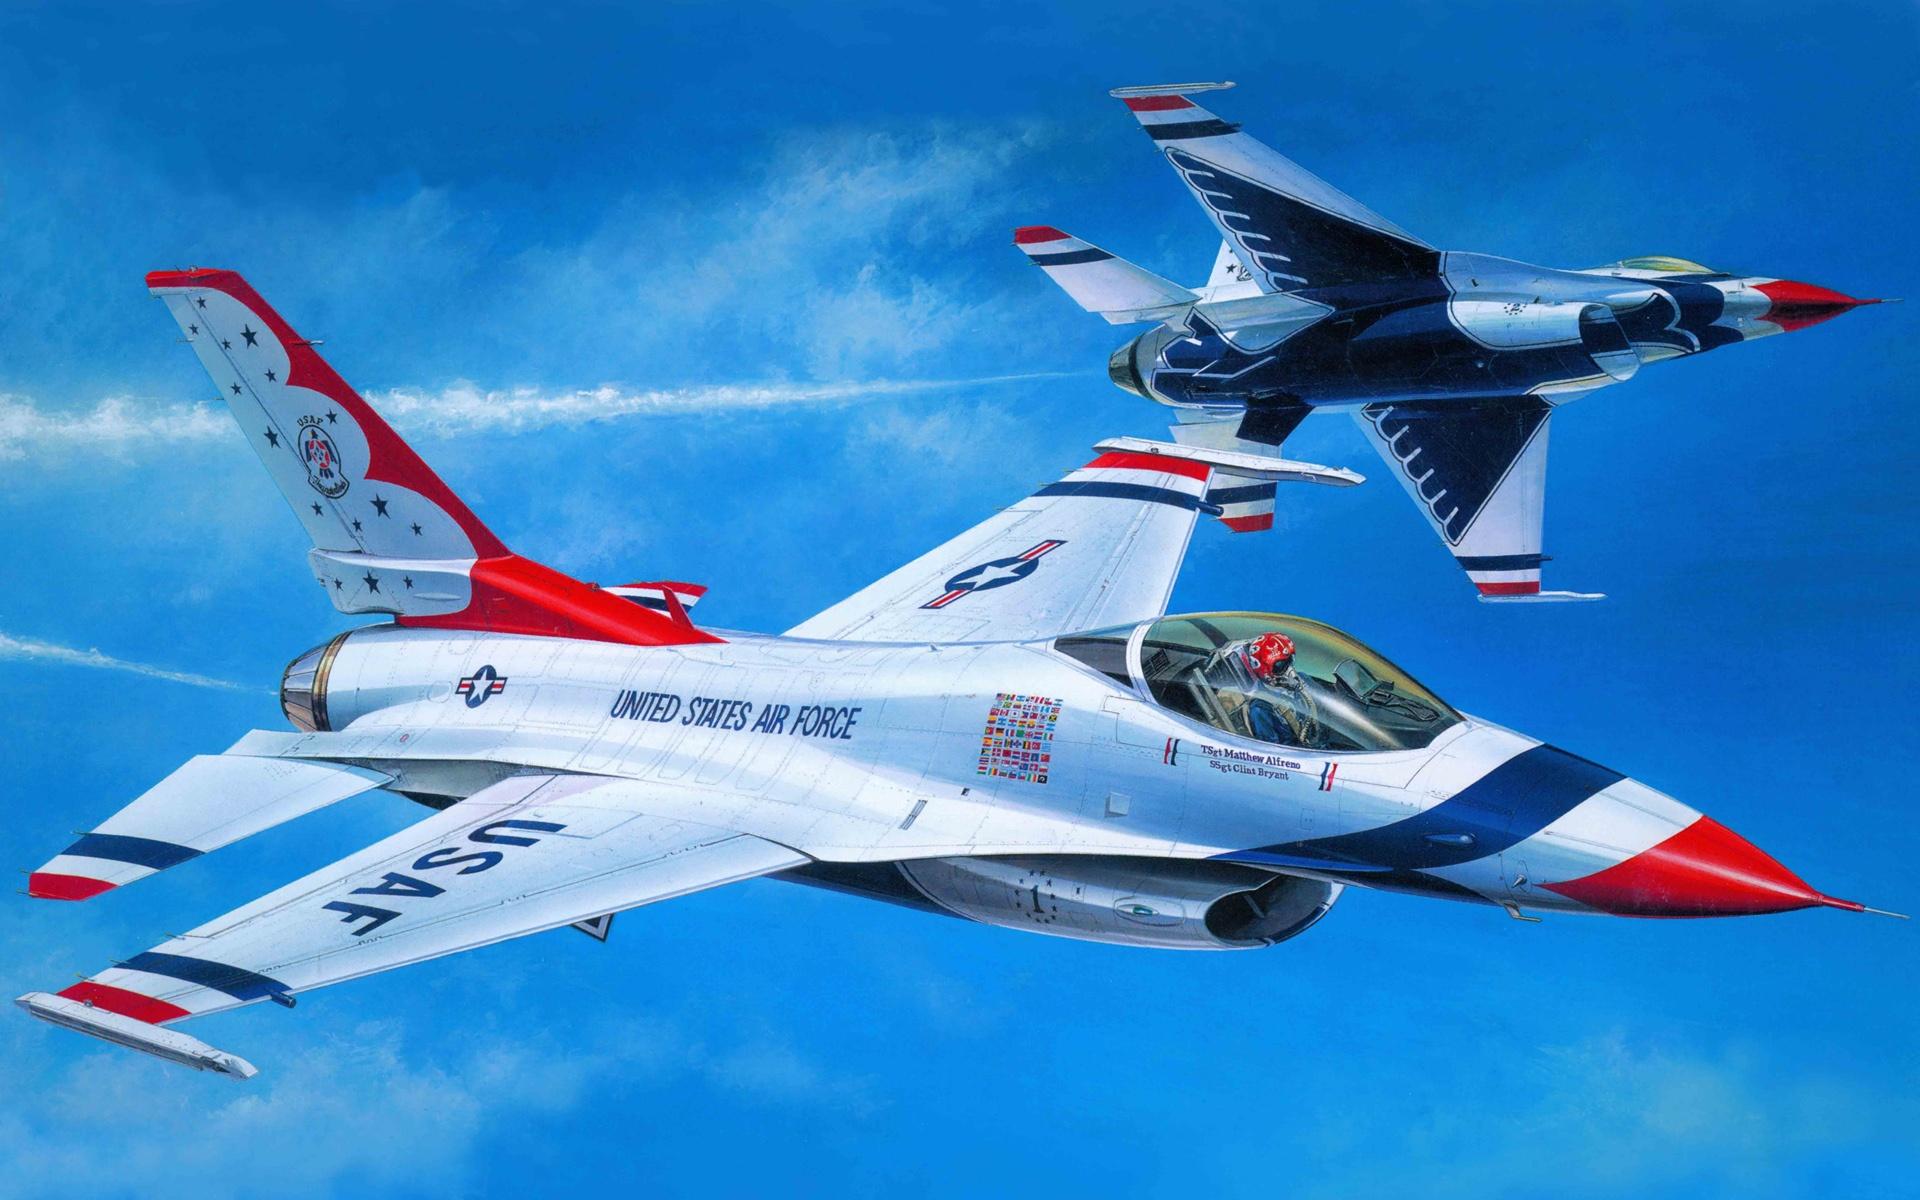 Wallpaper Art painting, air fighter aerobatics 1920x1200 HD Picture